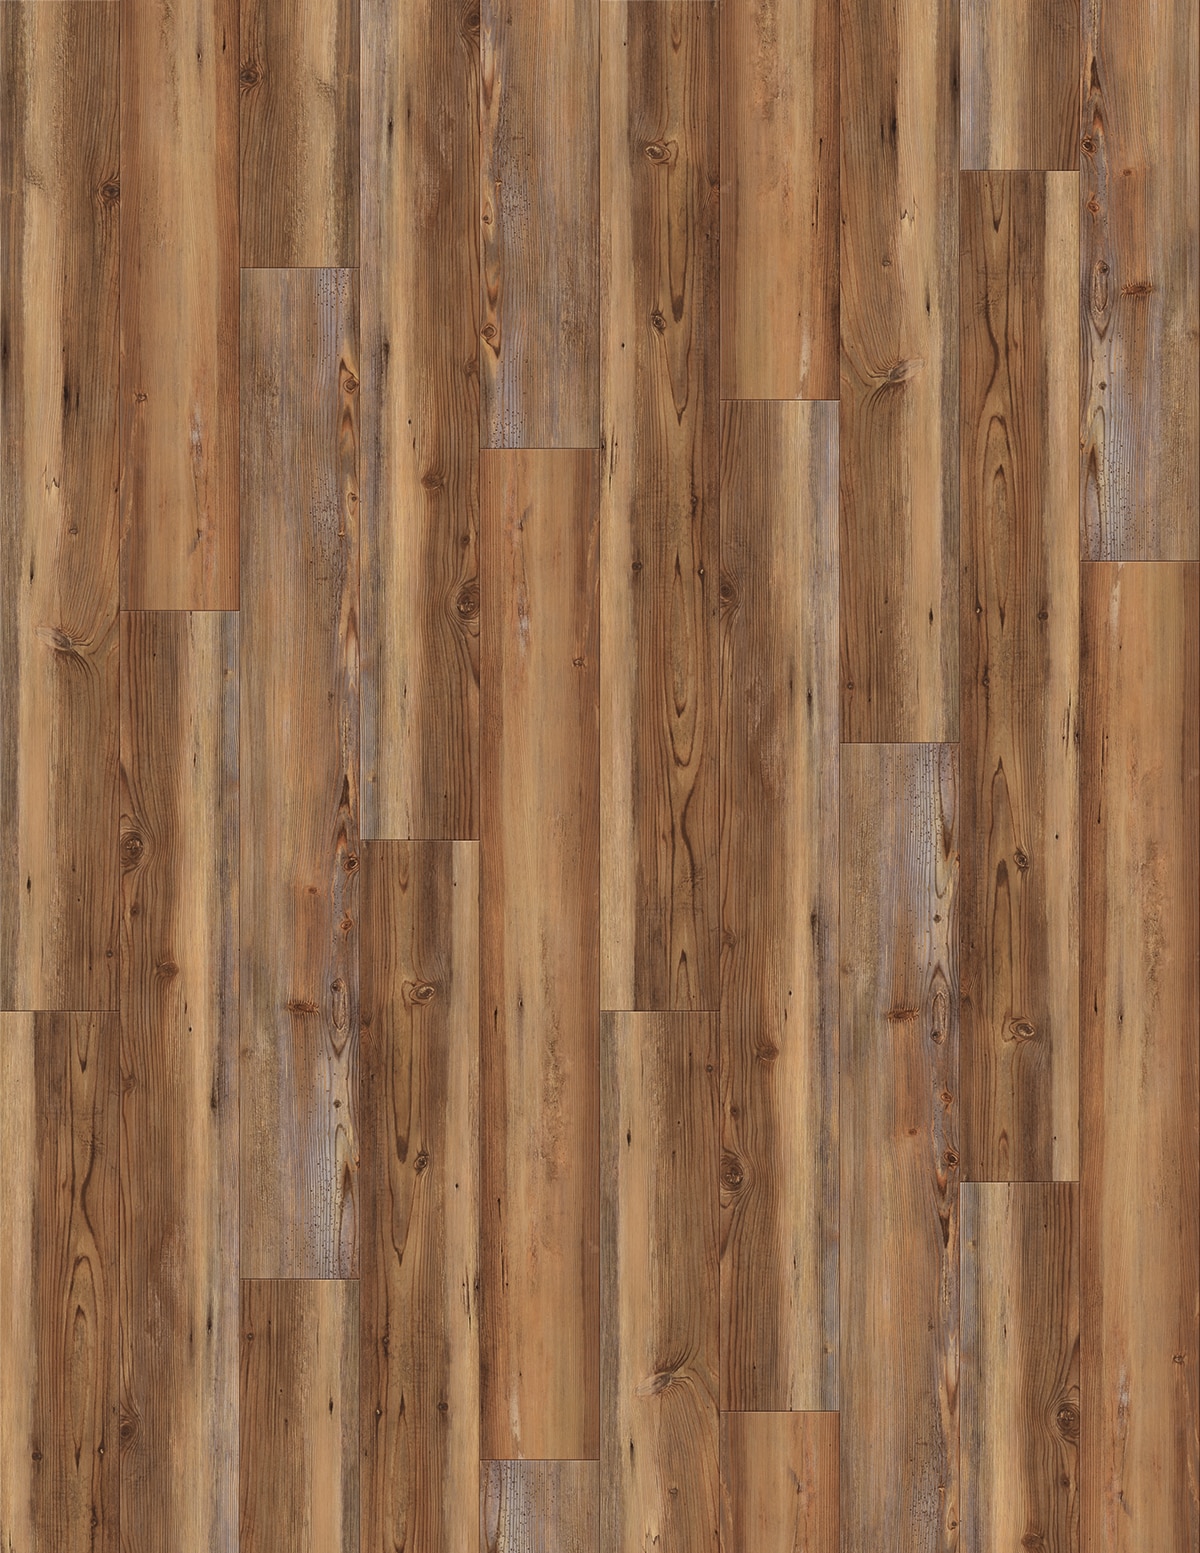 SPECIAL PURCHASE - Bel-Air Collection - Tacoma Oak - Rigid Core